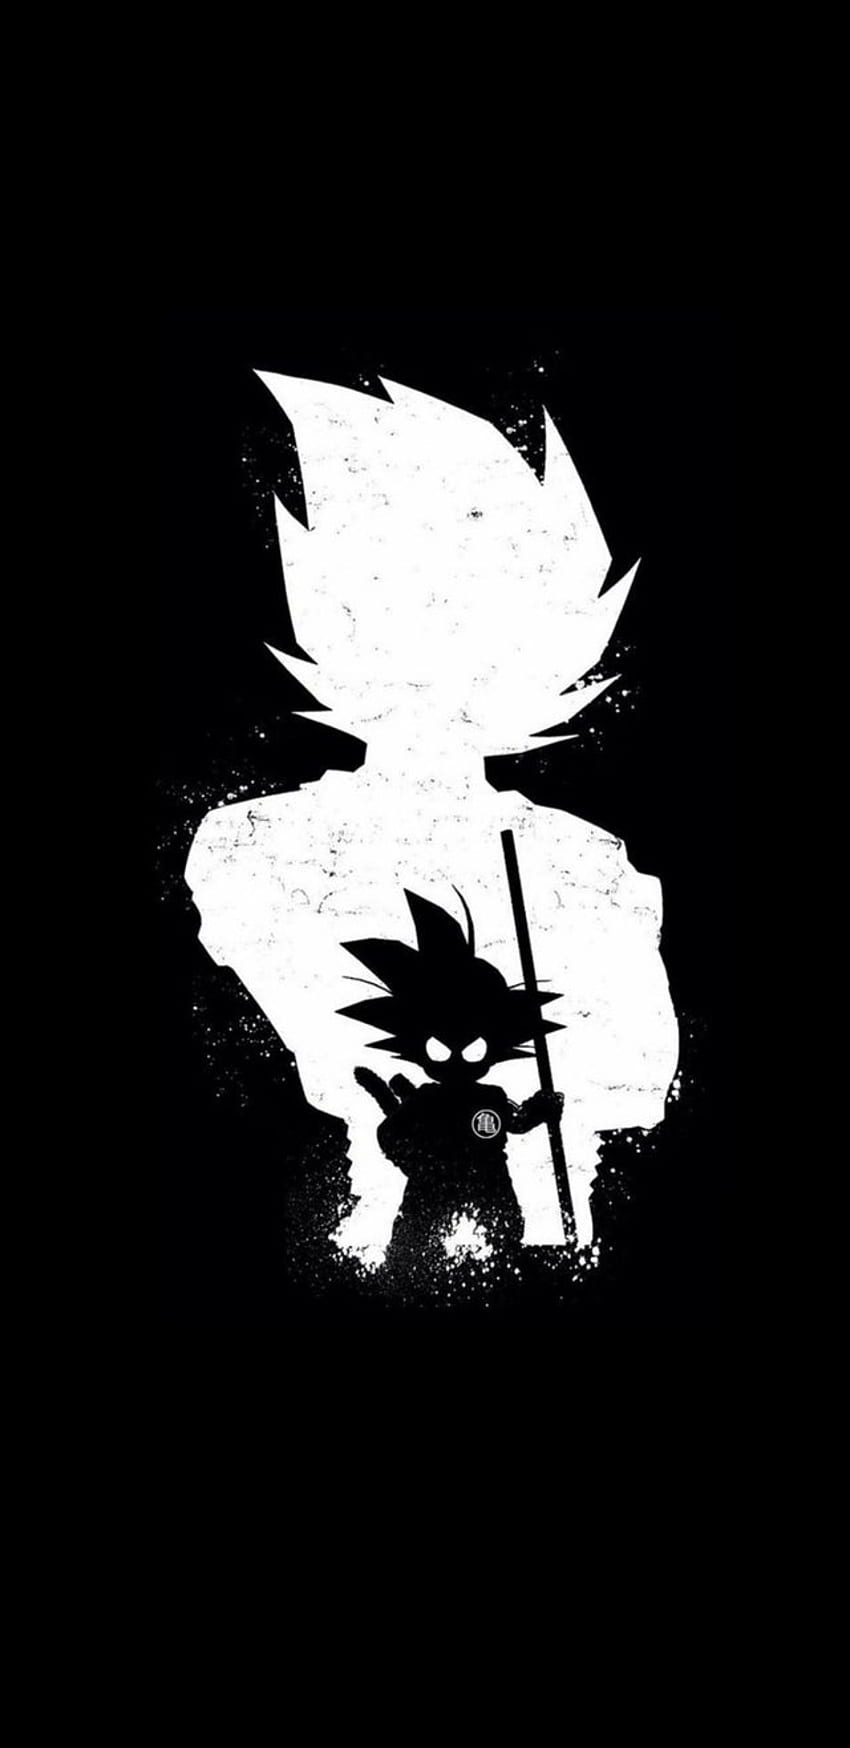 Oled For Phones And s. : R Dbz, Goku Oled HD phone wallpaper